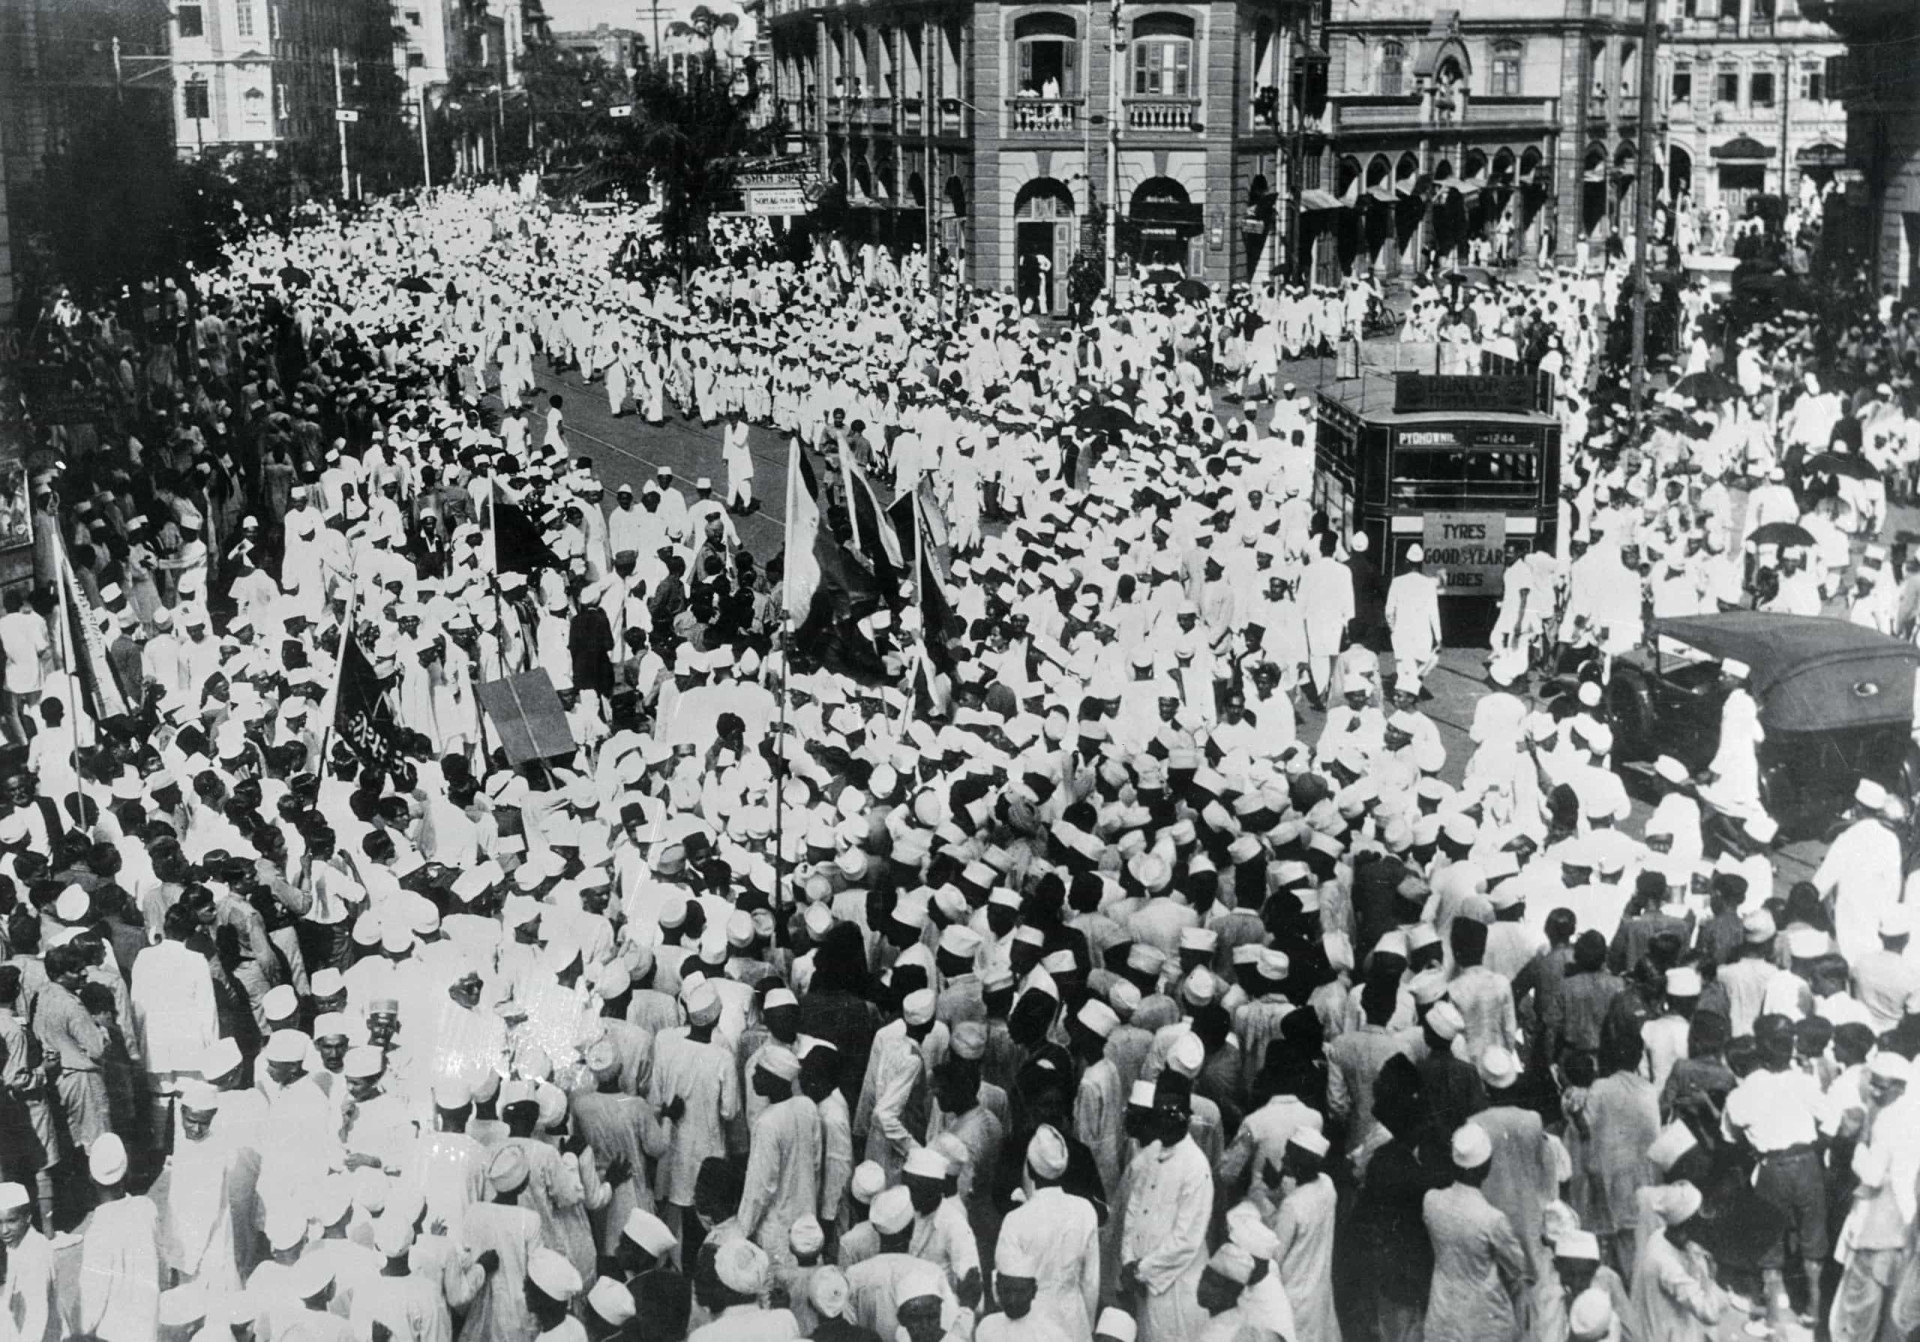 <p>Gandhi was arrested and detained on numerous occasions throughout his lifetime. Invariably, thousands would gather in protest. This procession took place in Bombay when the Indian National Congress working committee organized a demonstration protesting the detention yet again of their leader. </p><p>You may also like:<a href="https://www.starsinsider.com/n/464310?utm_source=msn.com&utm_medium=display&utm_campaign=referral_description&utm_content=447666v5en-us"> The best worst films ever</a></p>